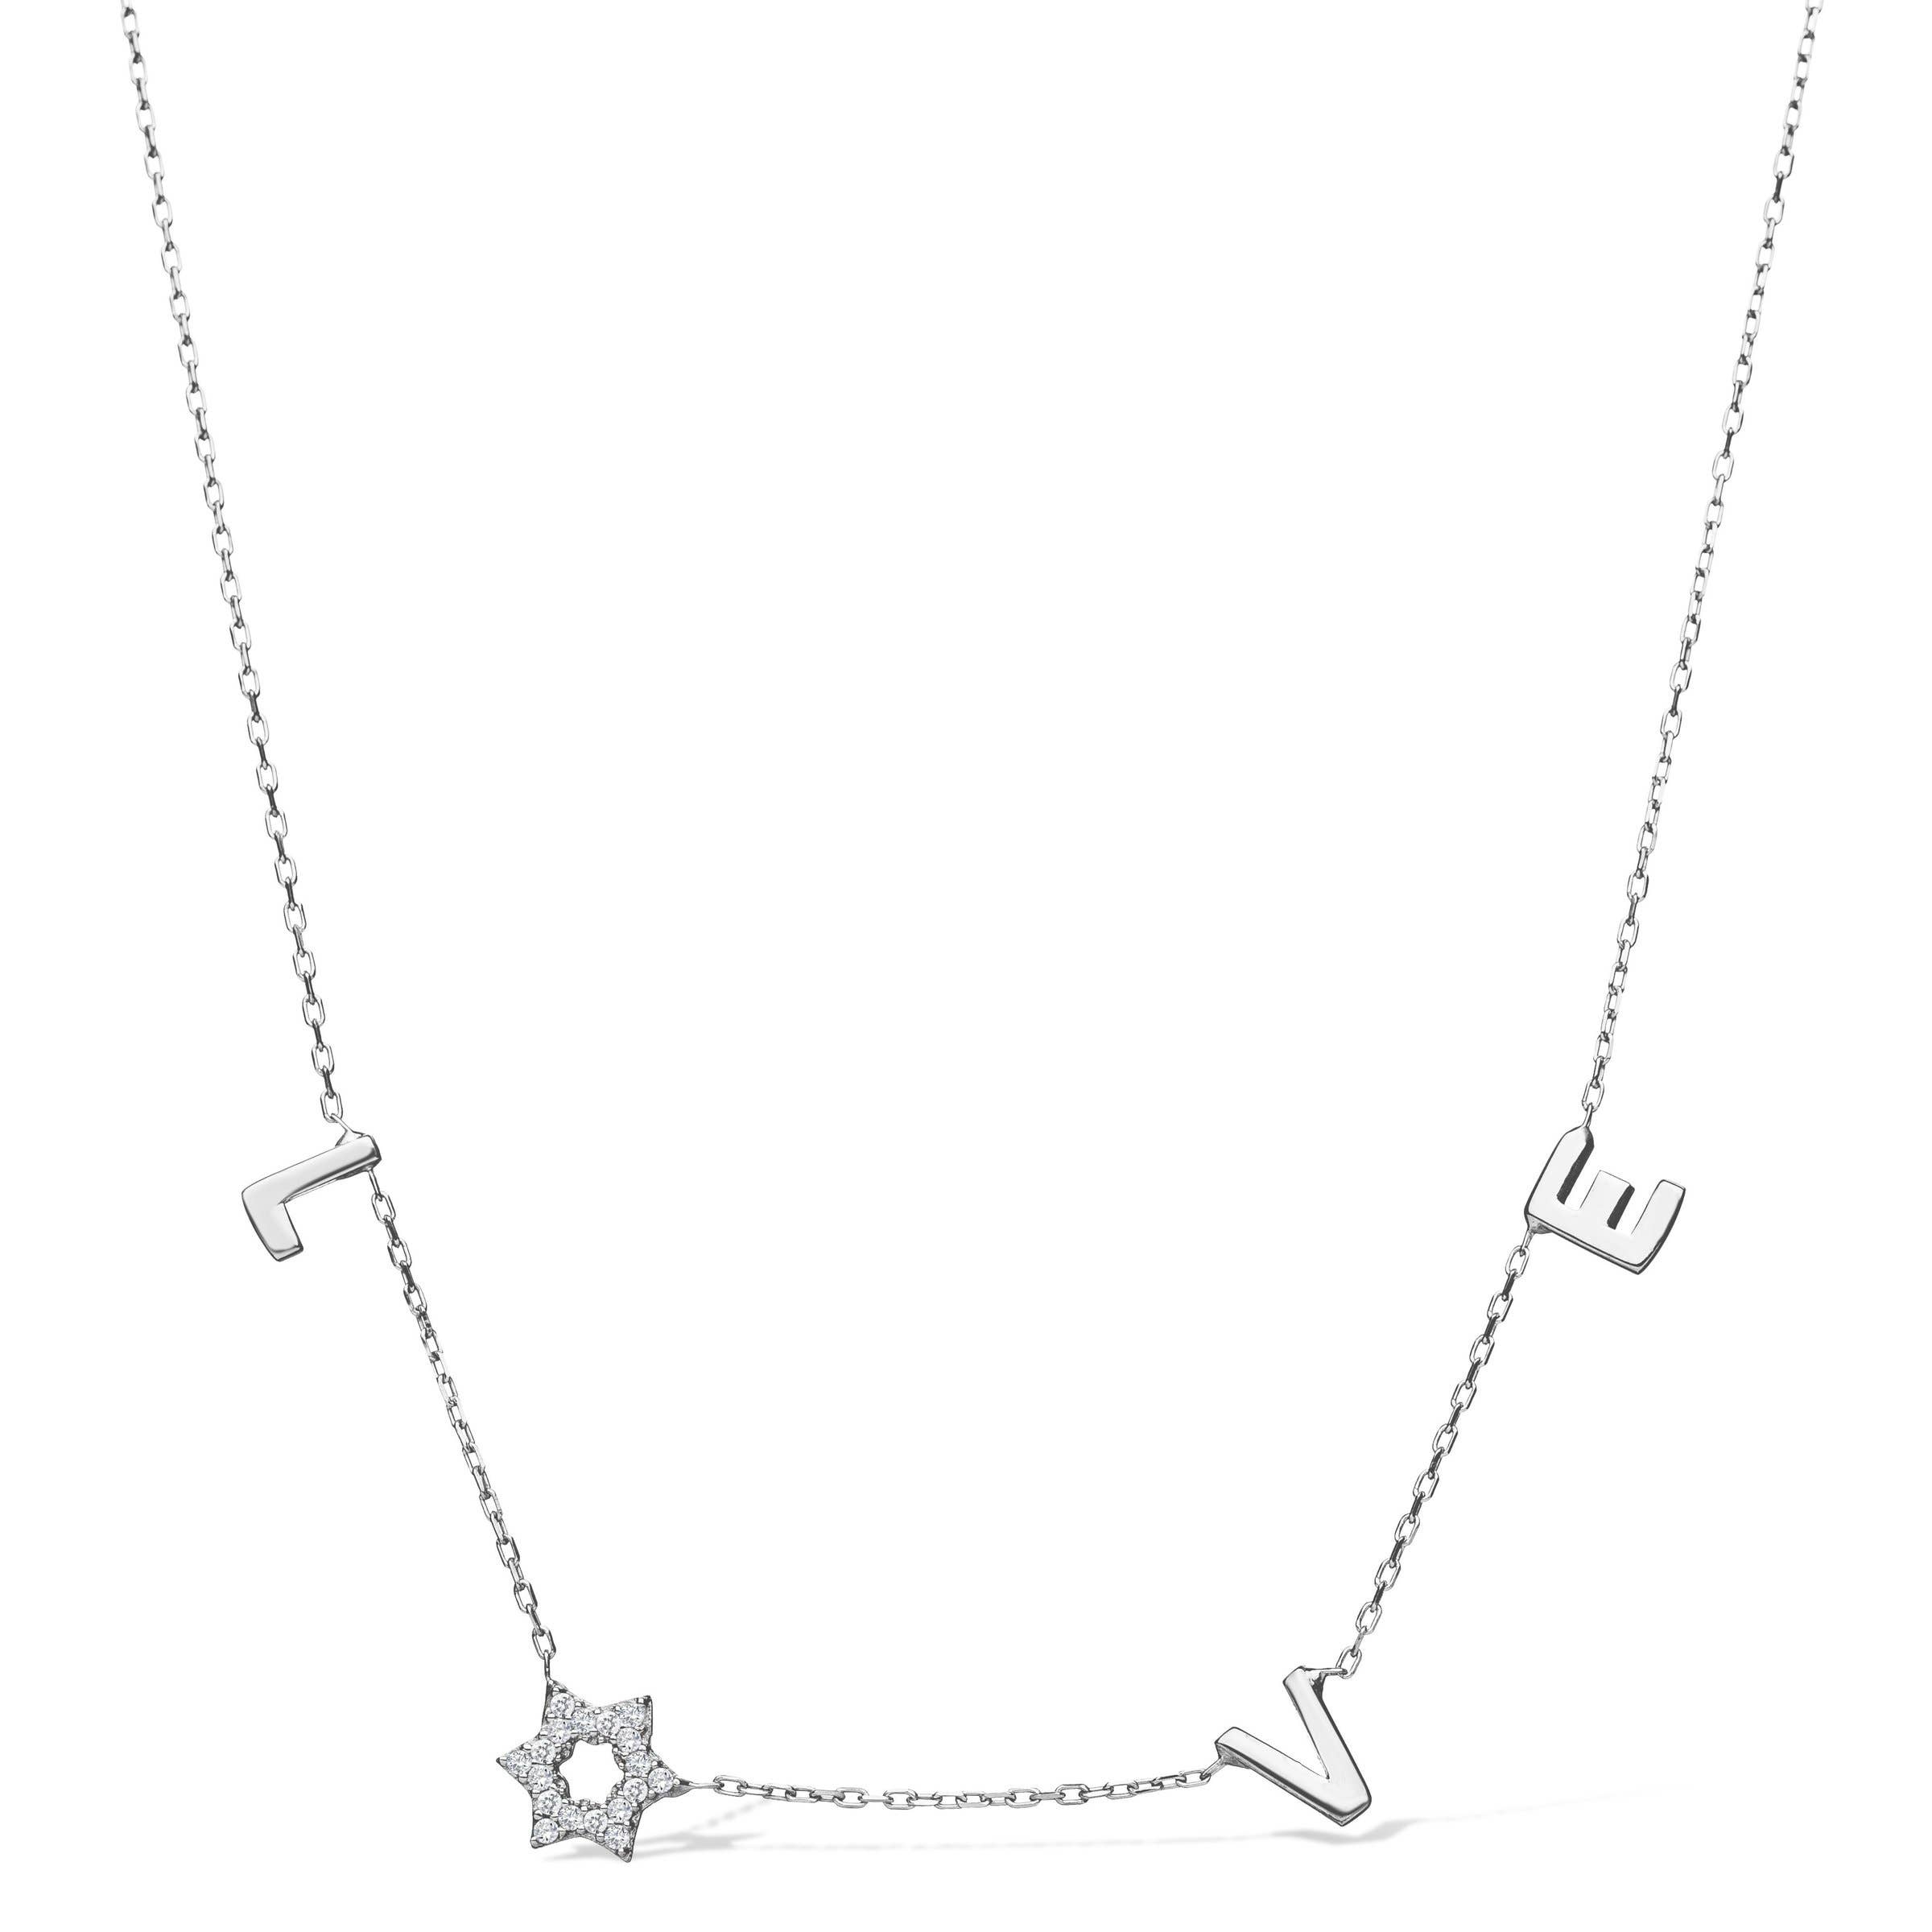 925 Sterling Silver Adjustable, ChaiSilver Necklace Extender